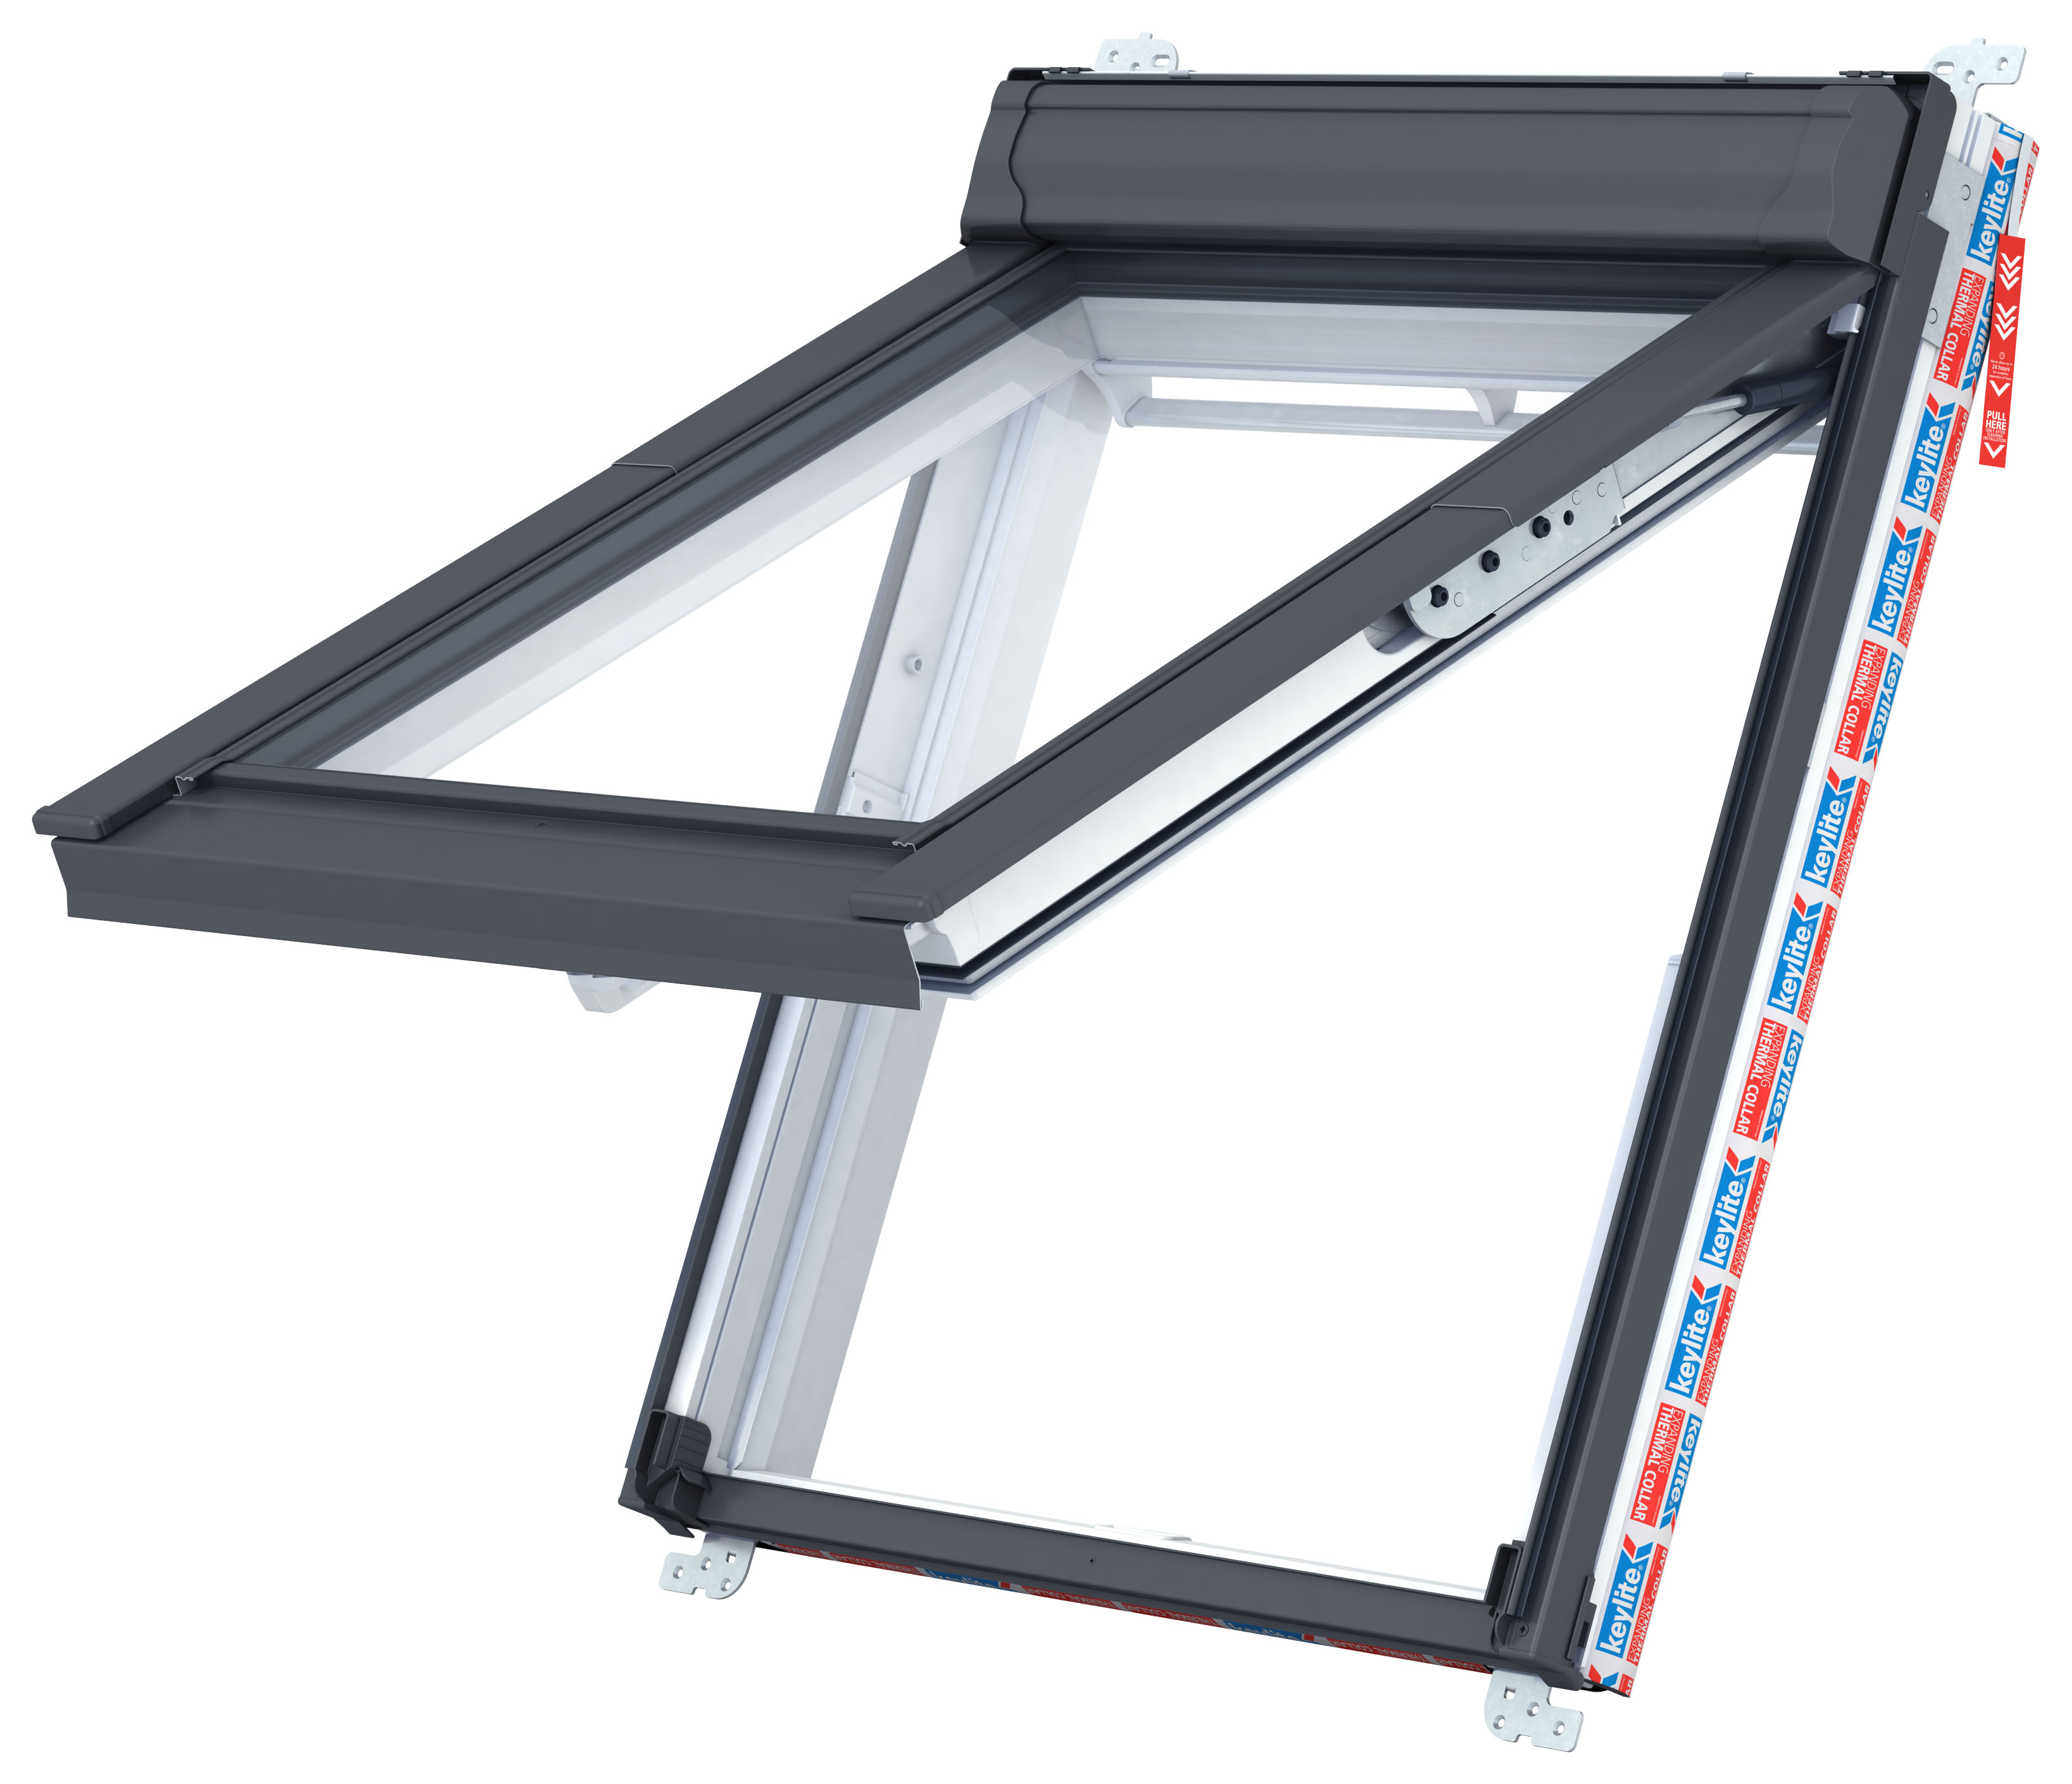 Keylite Top Hung Double Glazed White PVC Fire Escape Roof Window